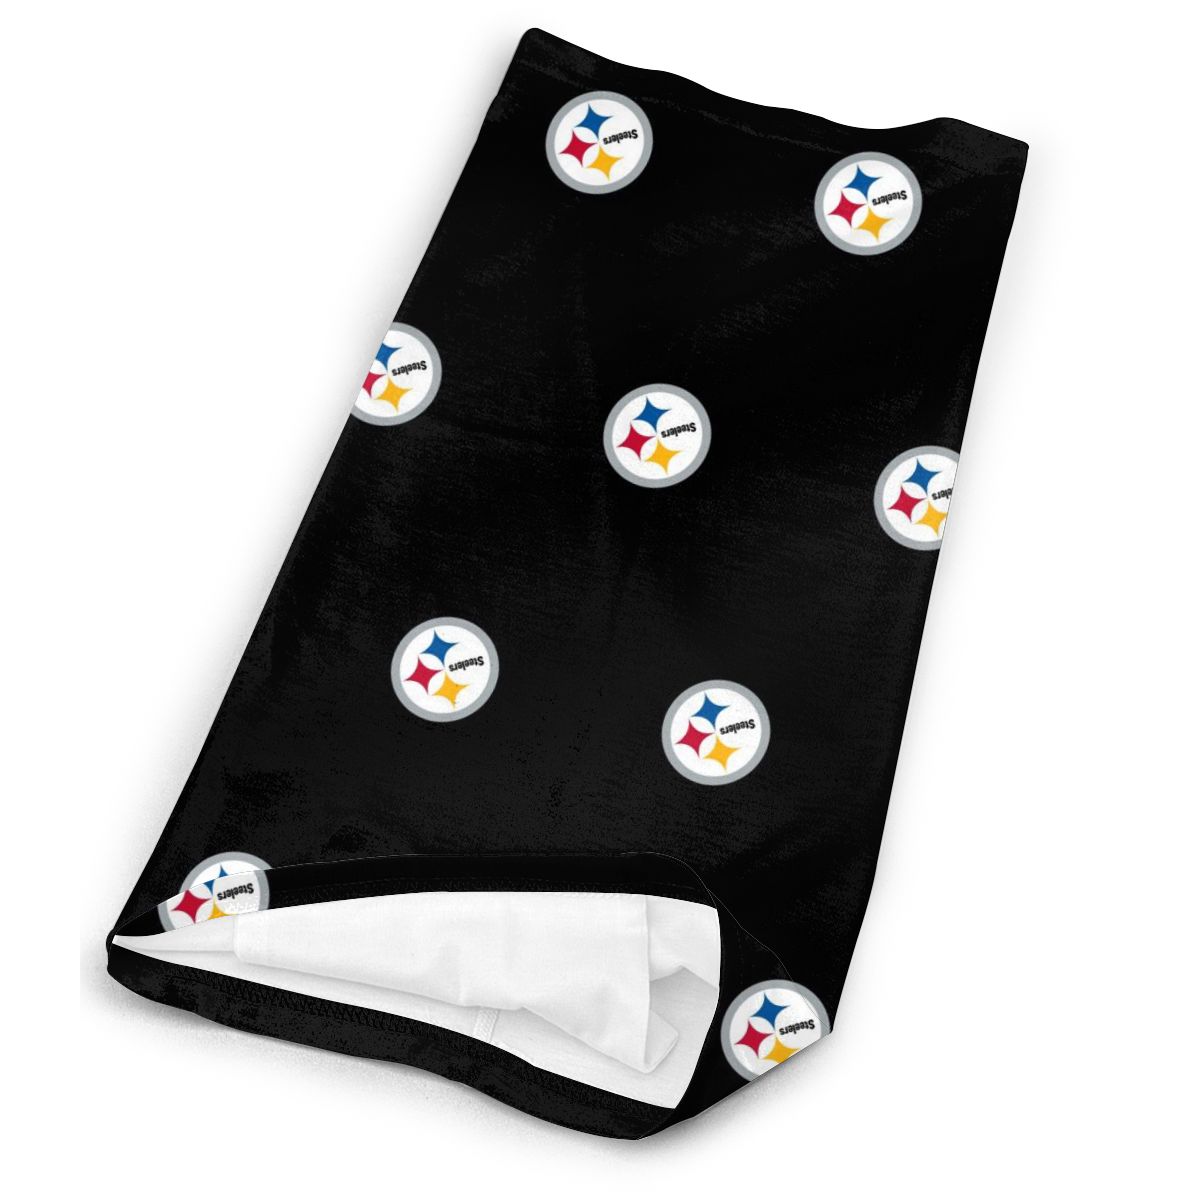 Reusble Mouth Cover Bandanas Pittsburgh Steelers Variety Head Scarf Face Mask With PM 2.5 Filter